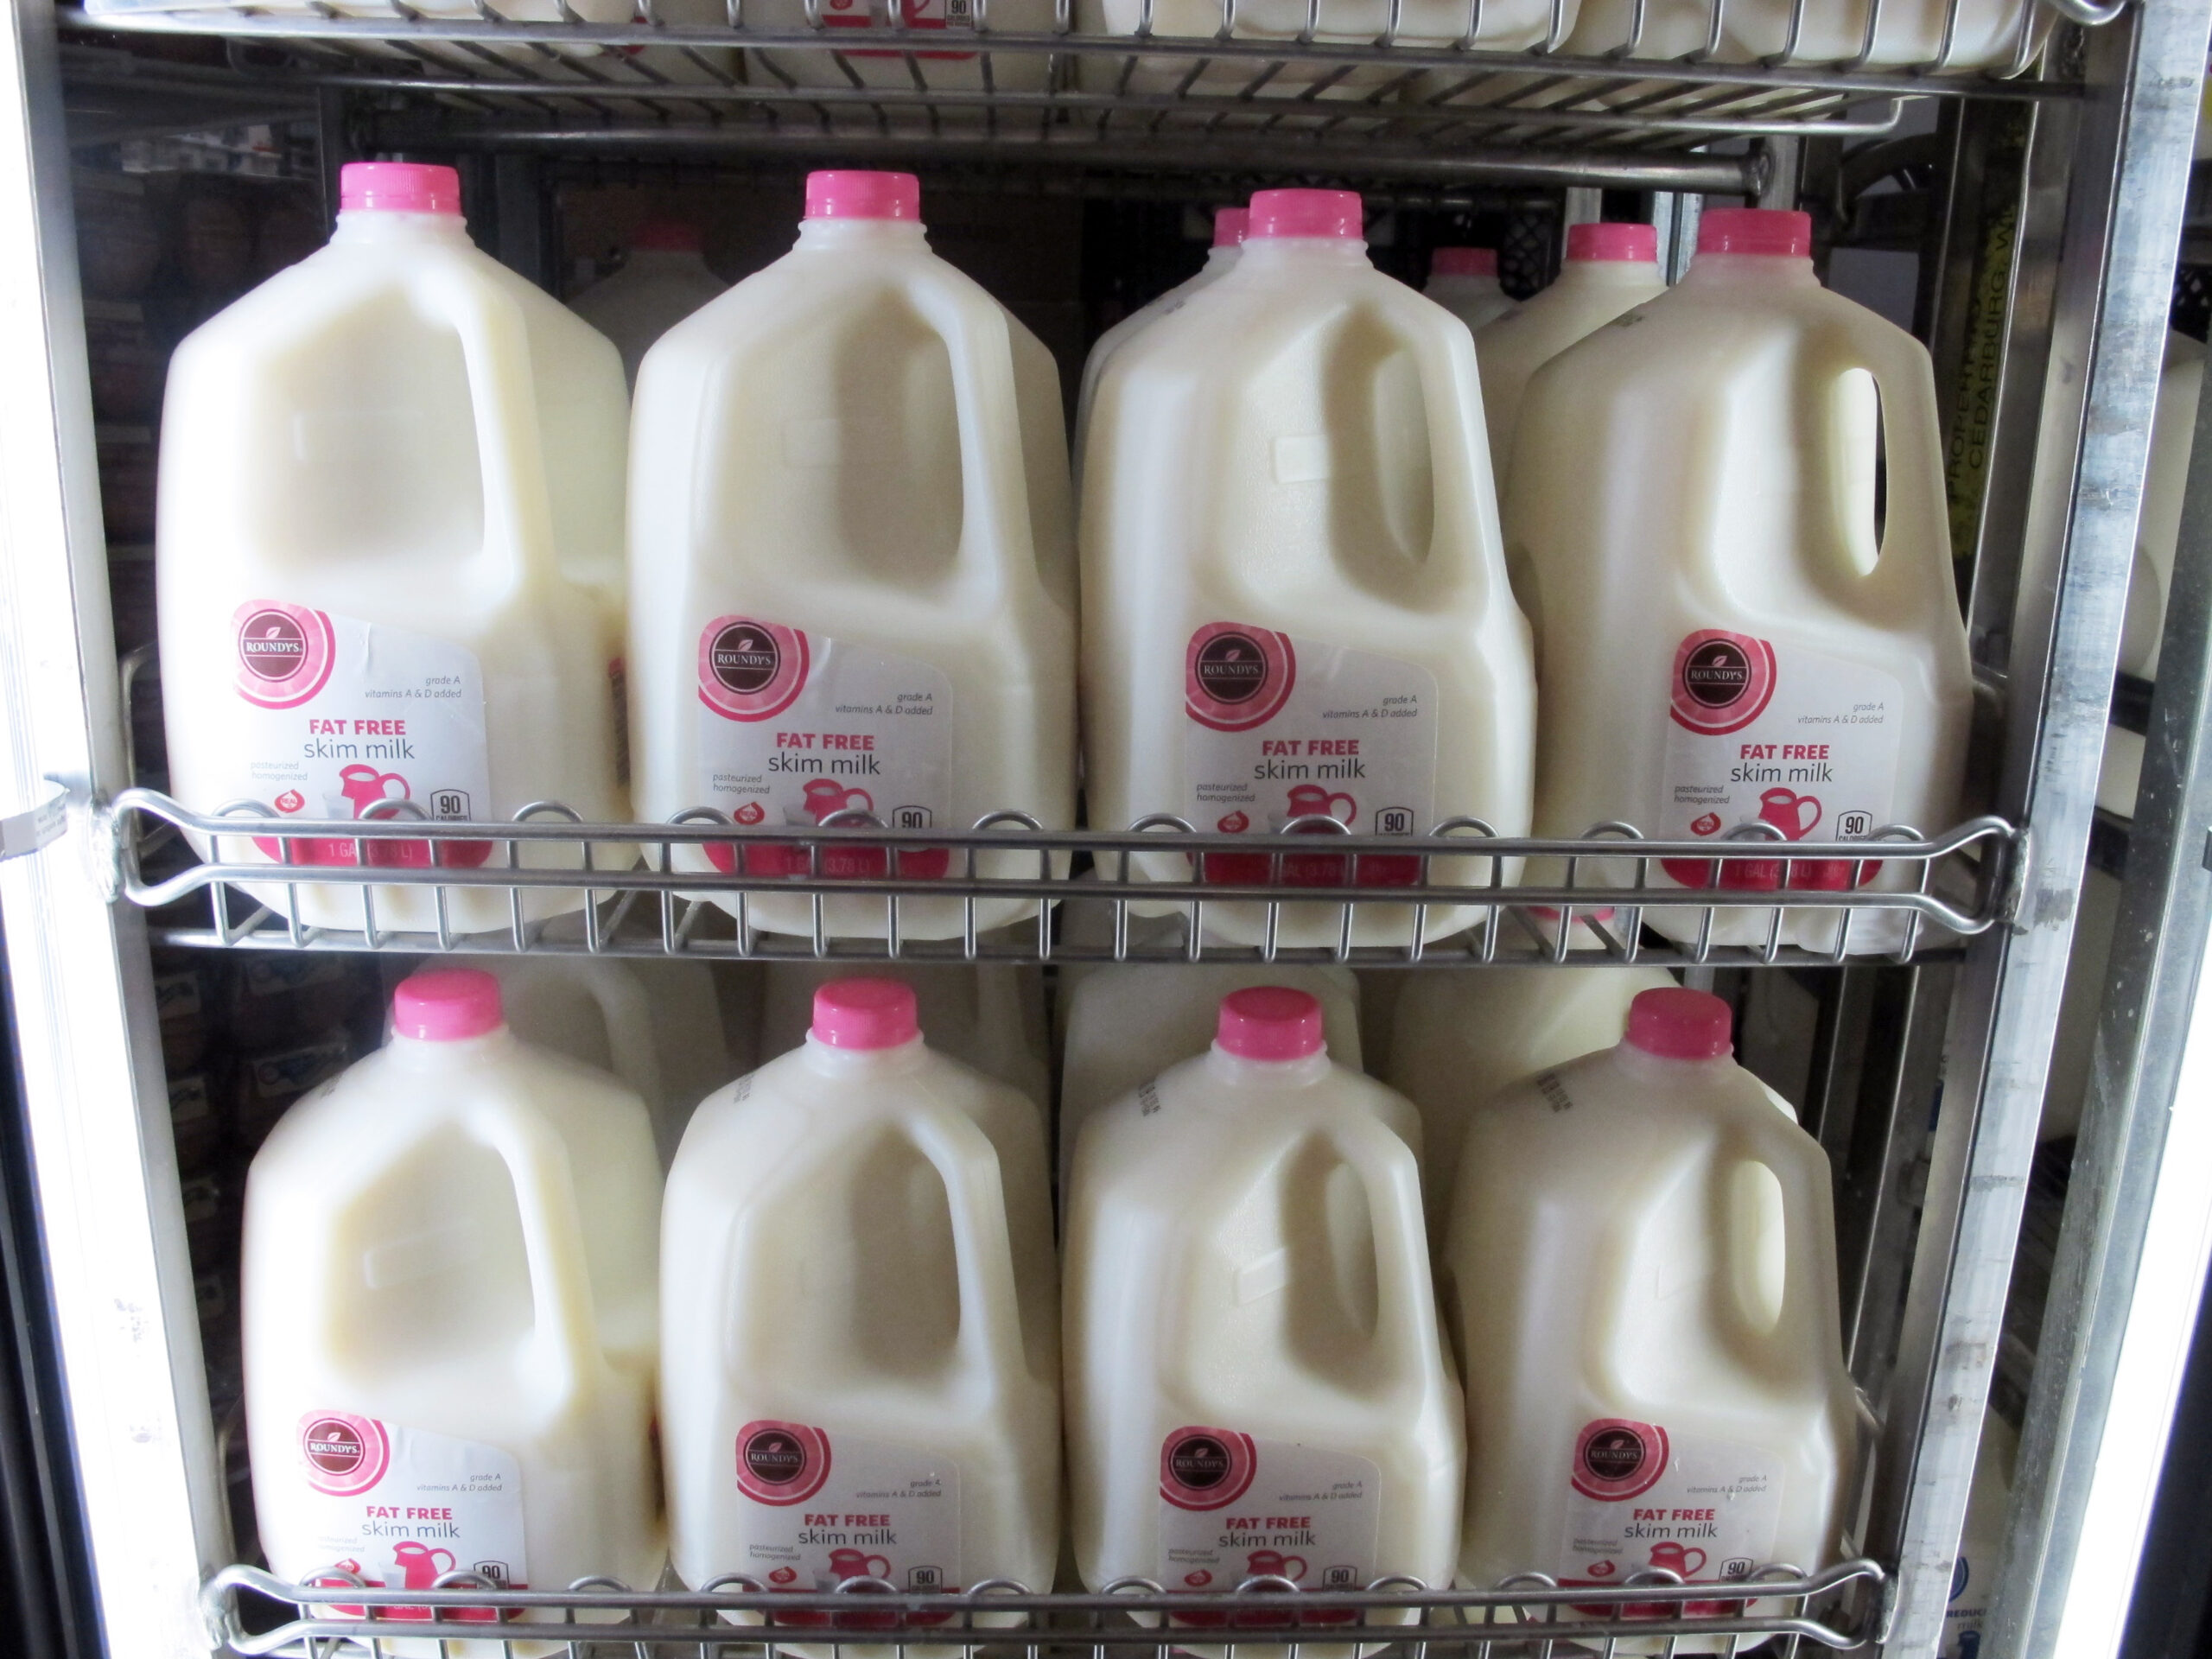 Milk for sale at a Milwaukee grocery store